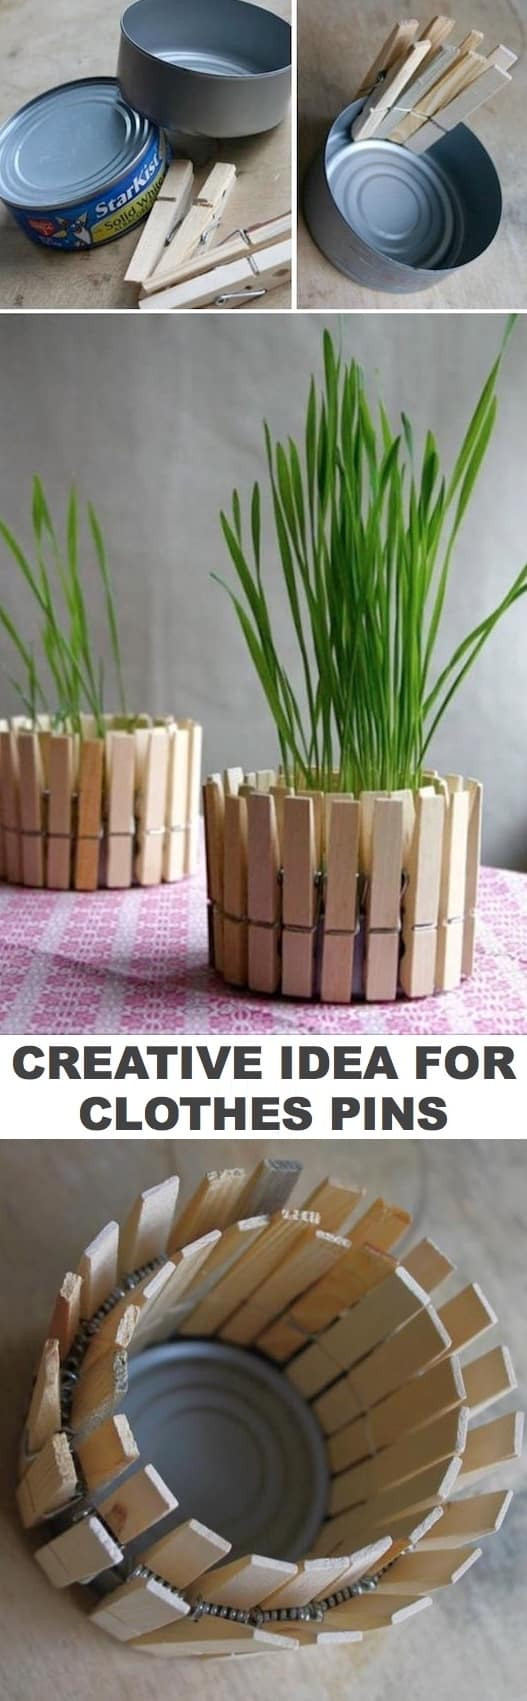 Simple Craft Ideas For Adults
 30 Easy Craft Ideas That Will Spark Your Creativity DIY